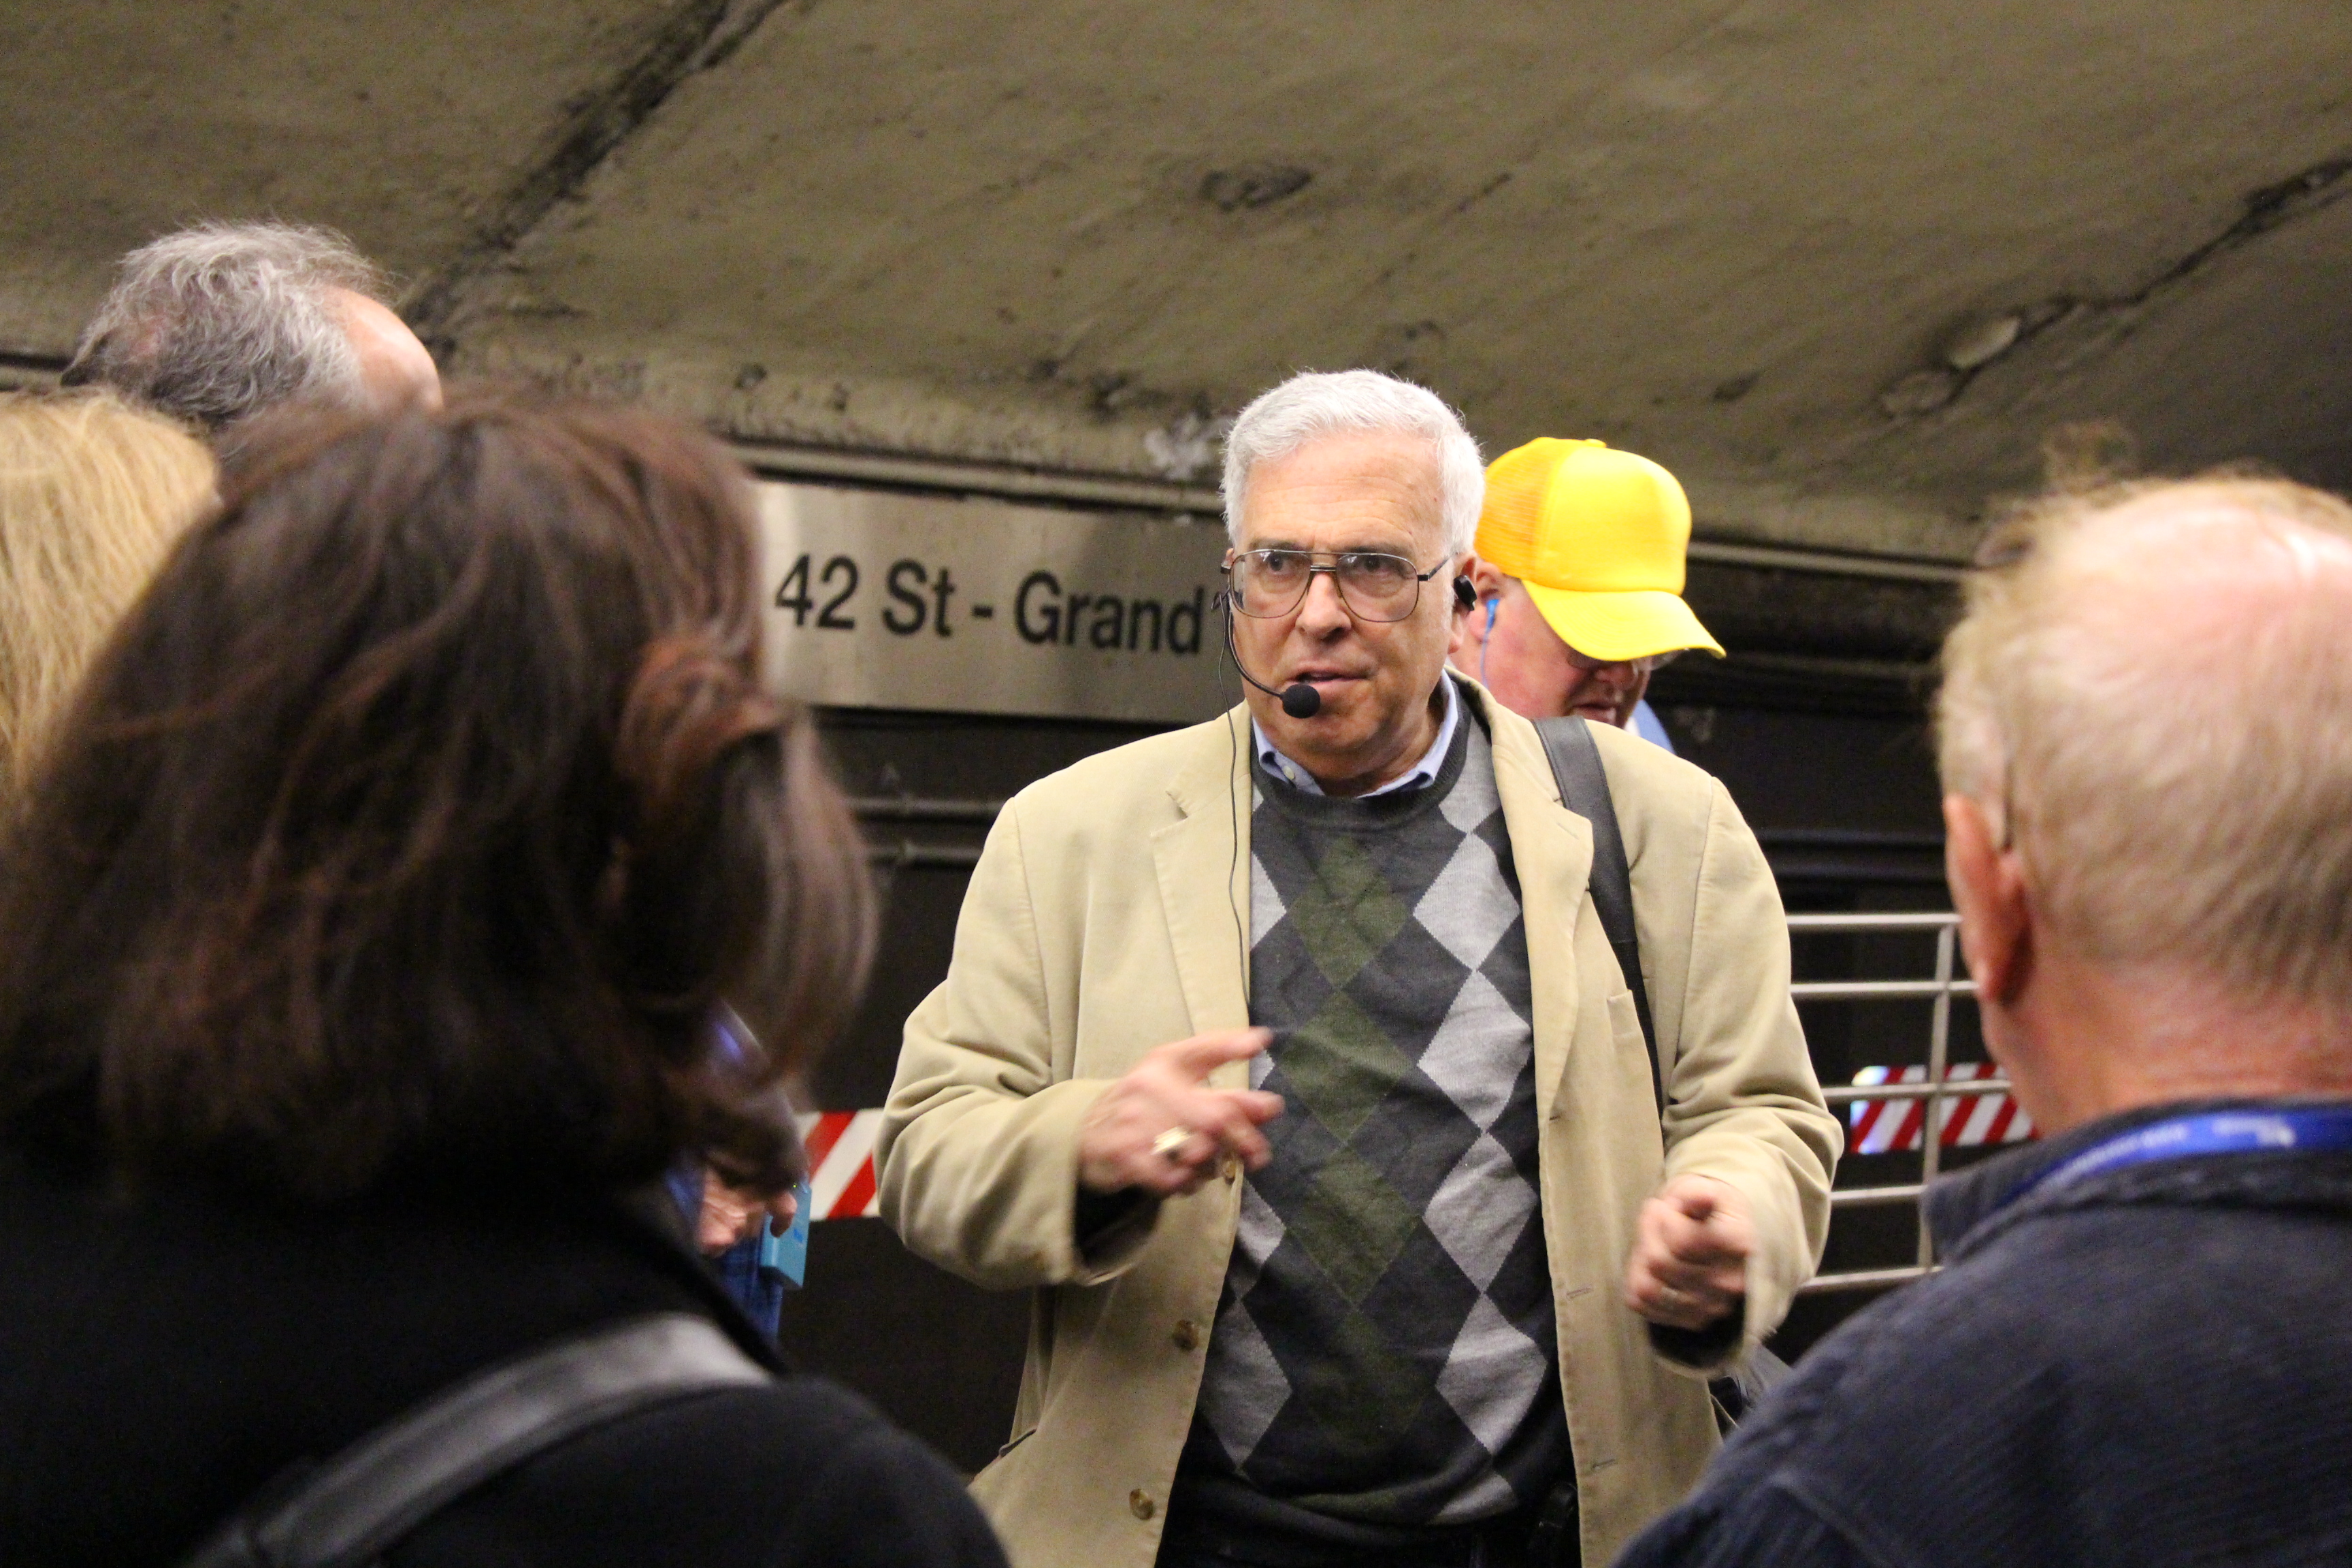 Andrew Sparberg speaks into a microphone in front of a tour group on the 7 platform at Grand Central Terminal.